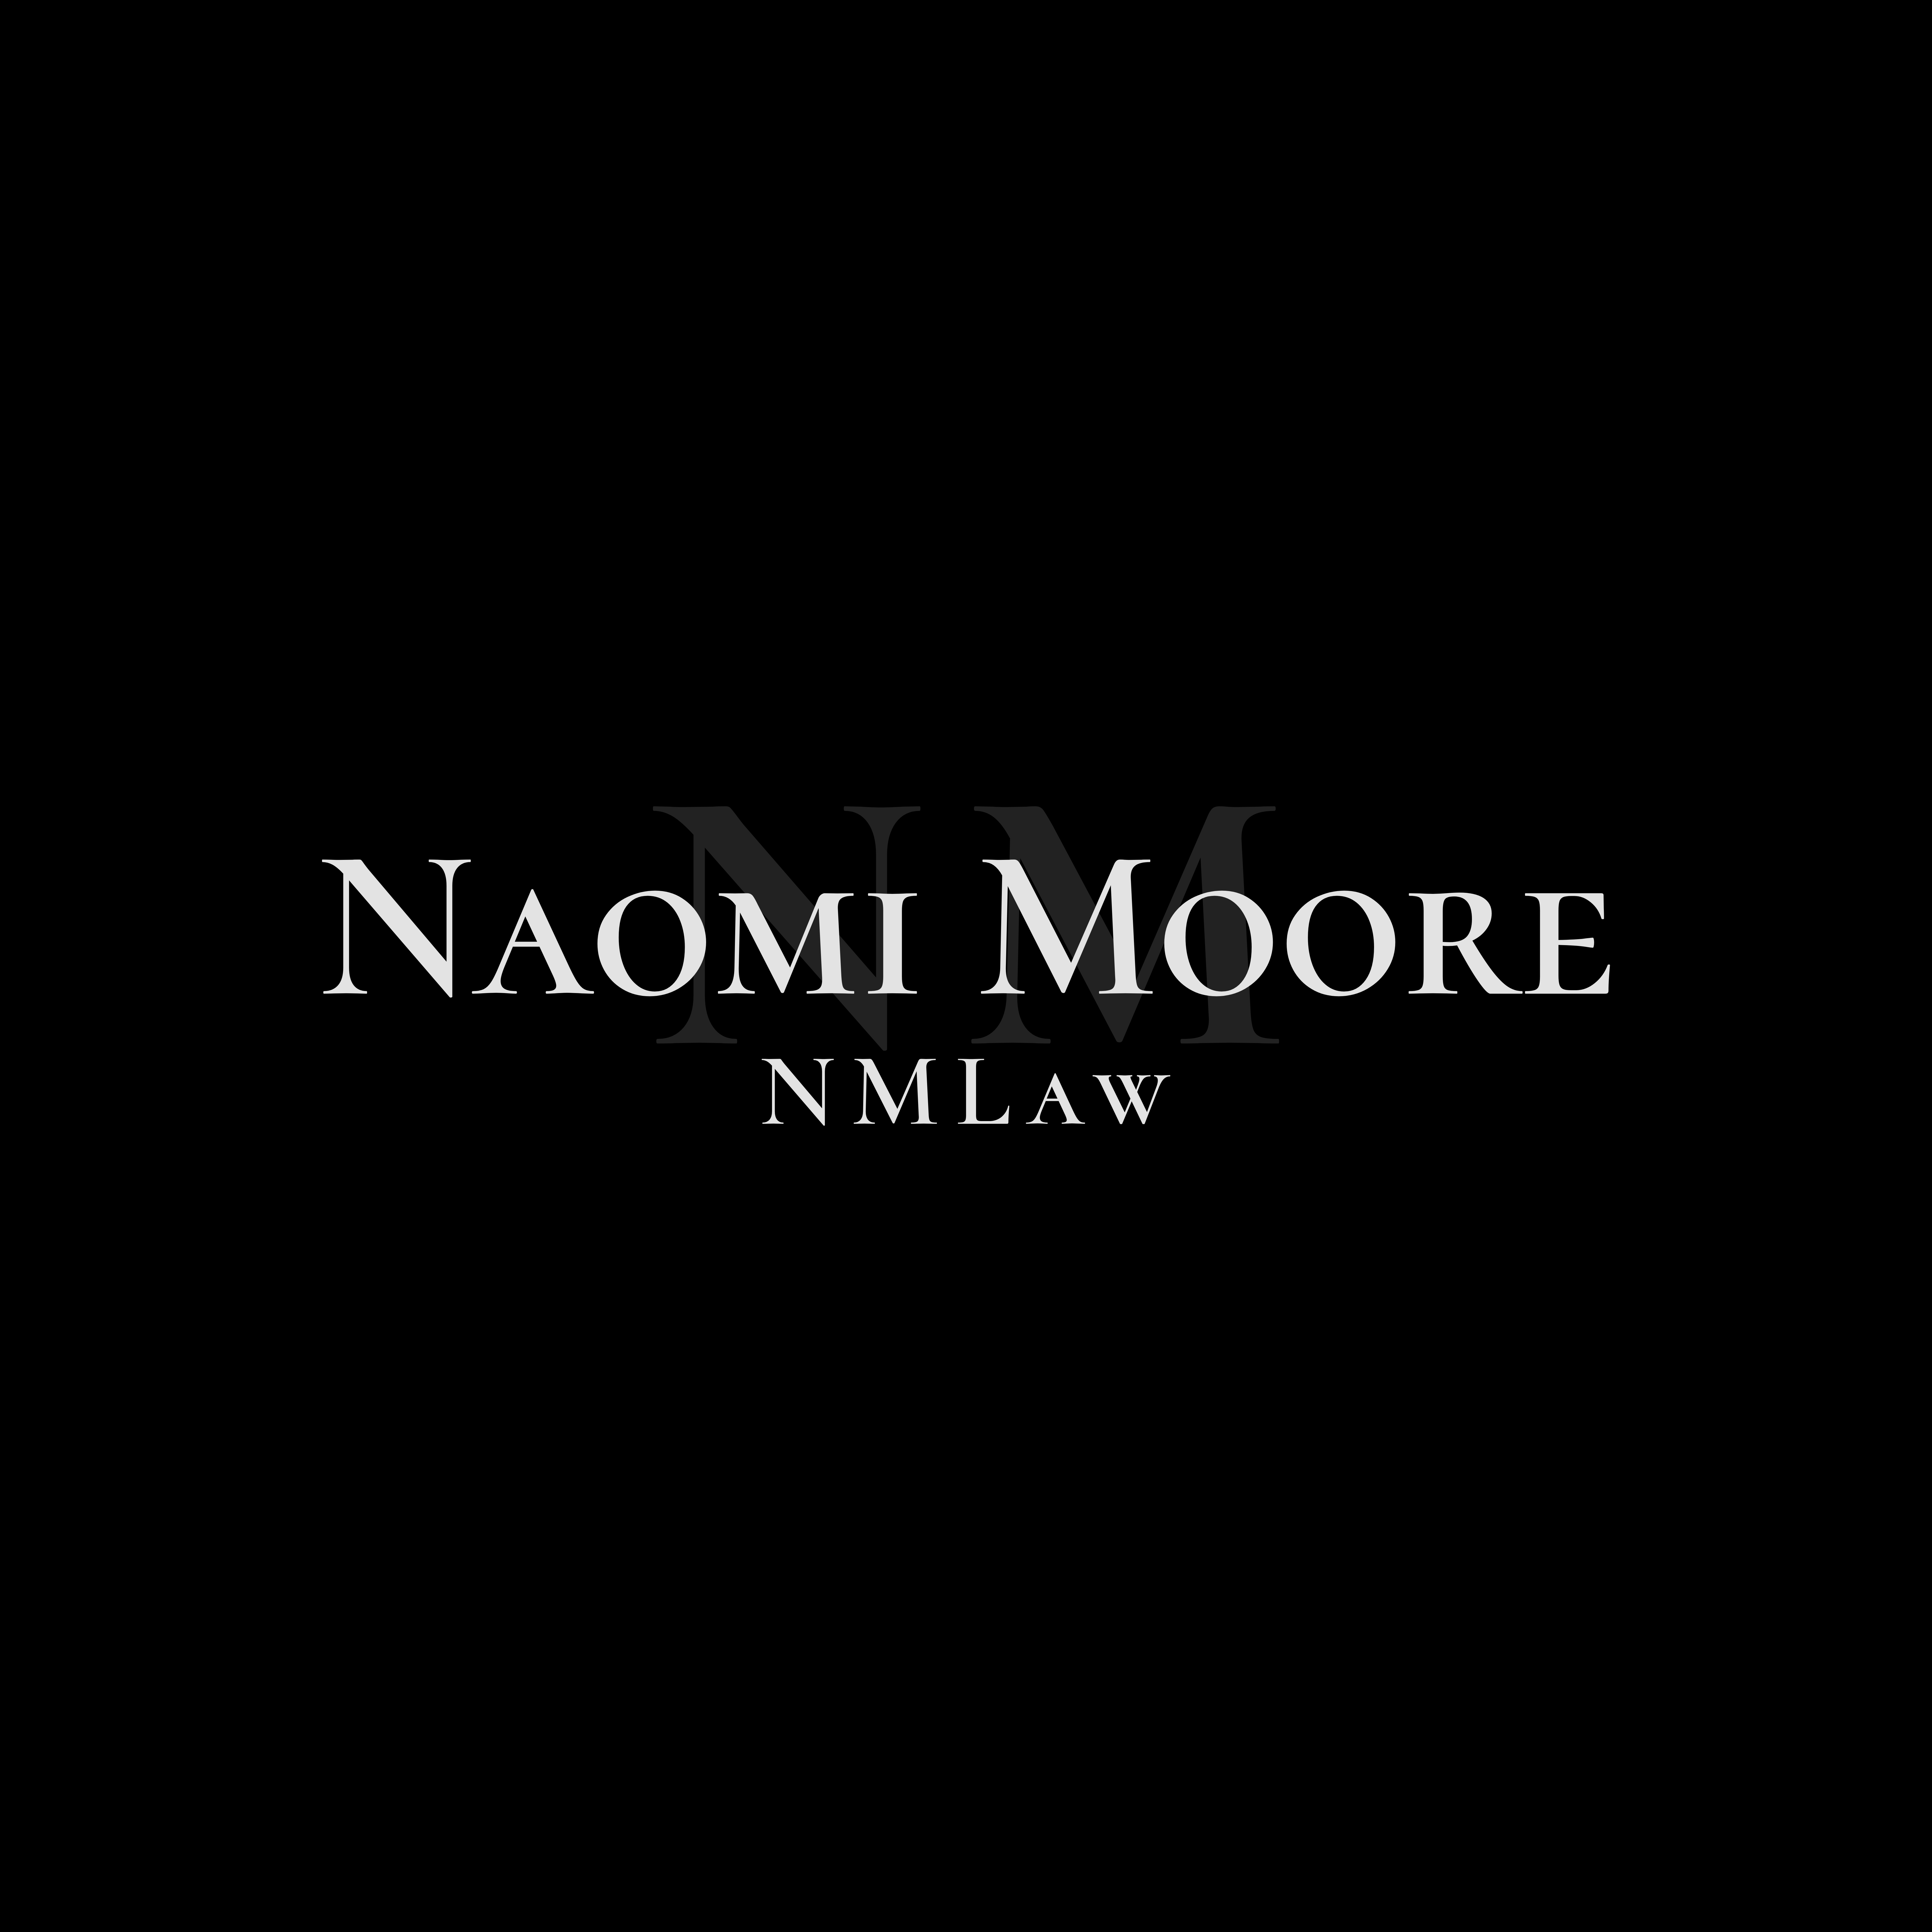 Naomi Moore Freelance Solicitor